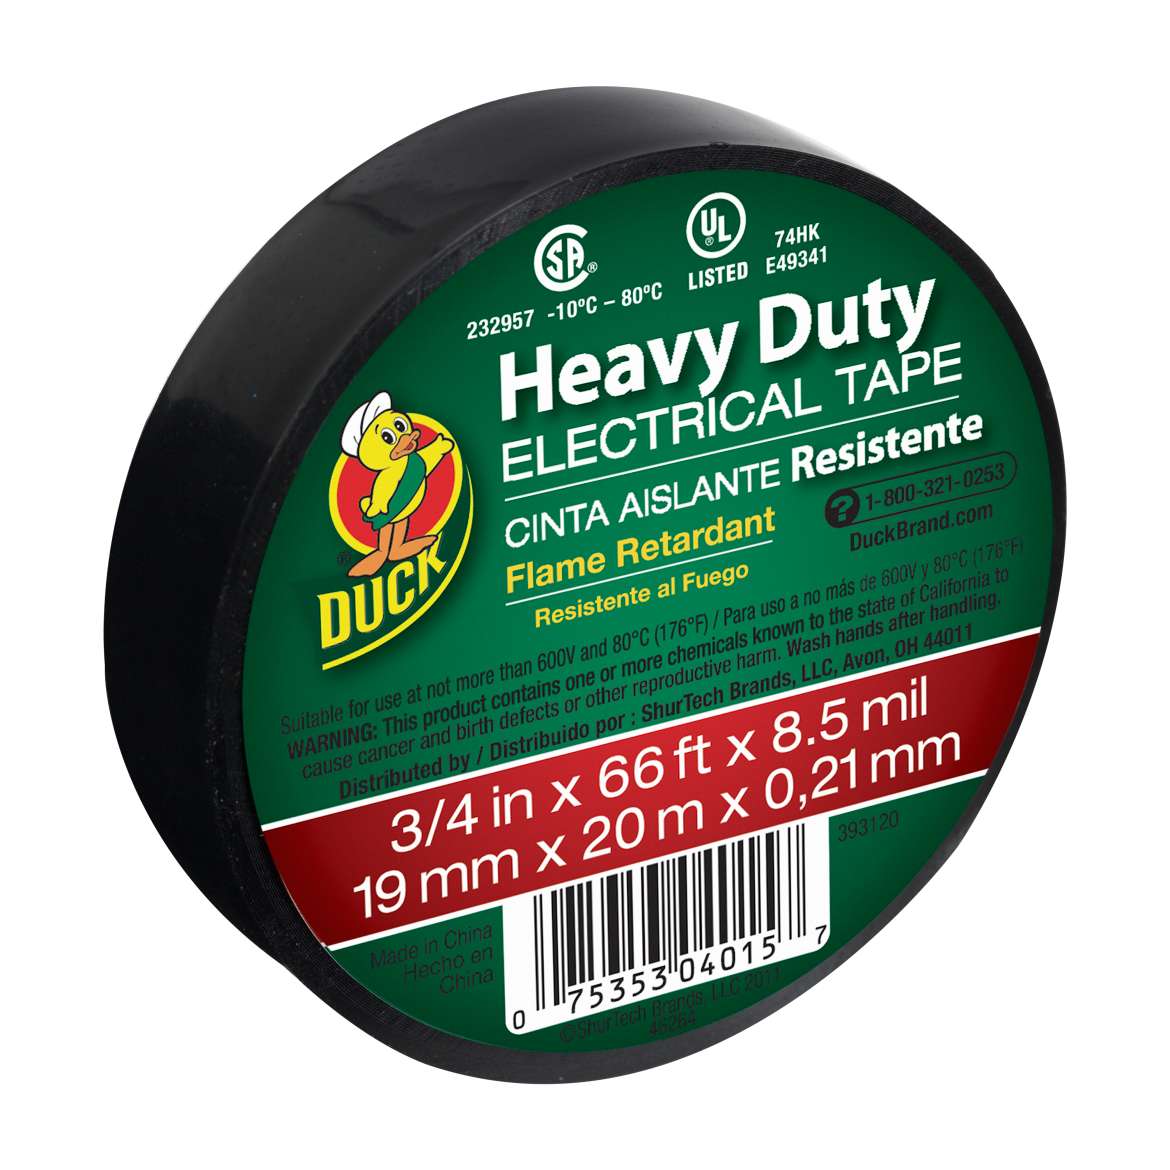 Heavy Duty Electrical Tape Image